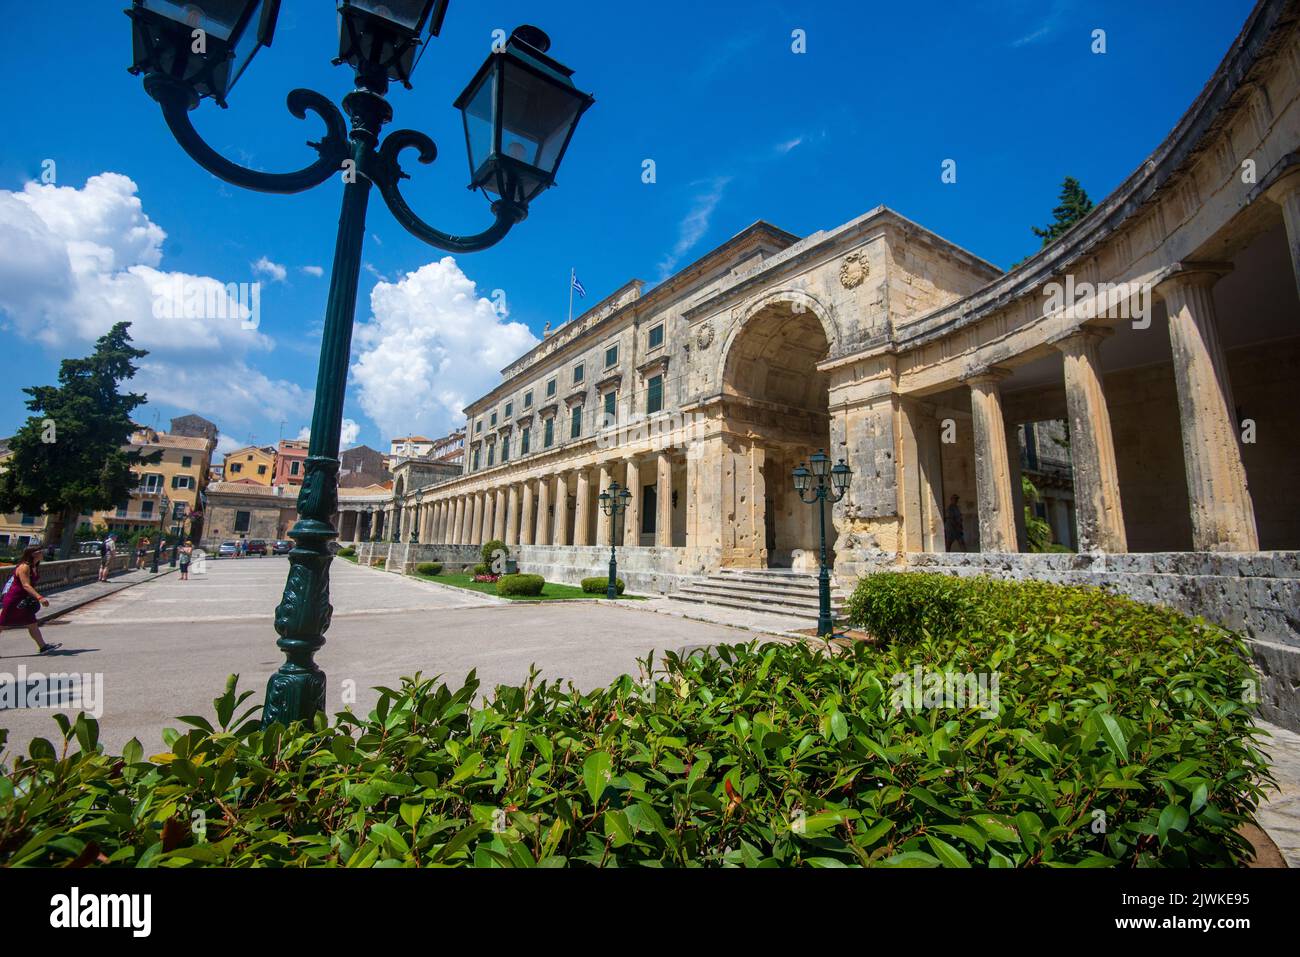 Palace of St. Michael and St. George on Corfu, Greece. Commissioned by Sir Thomas Maitland. Stock Photo